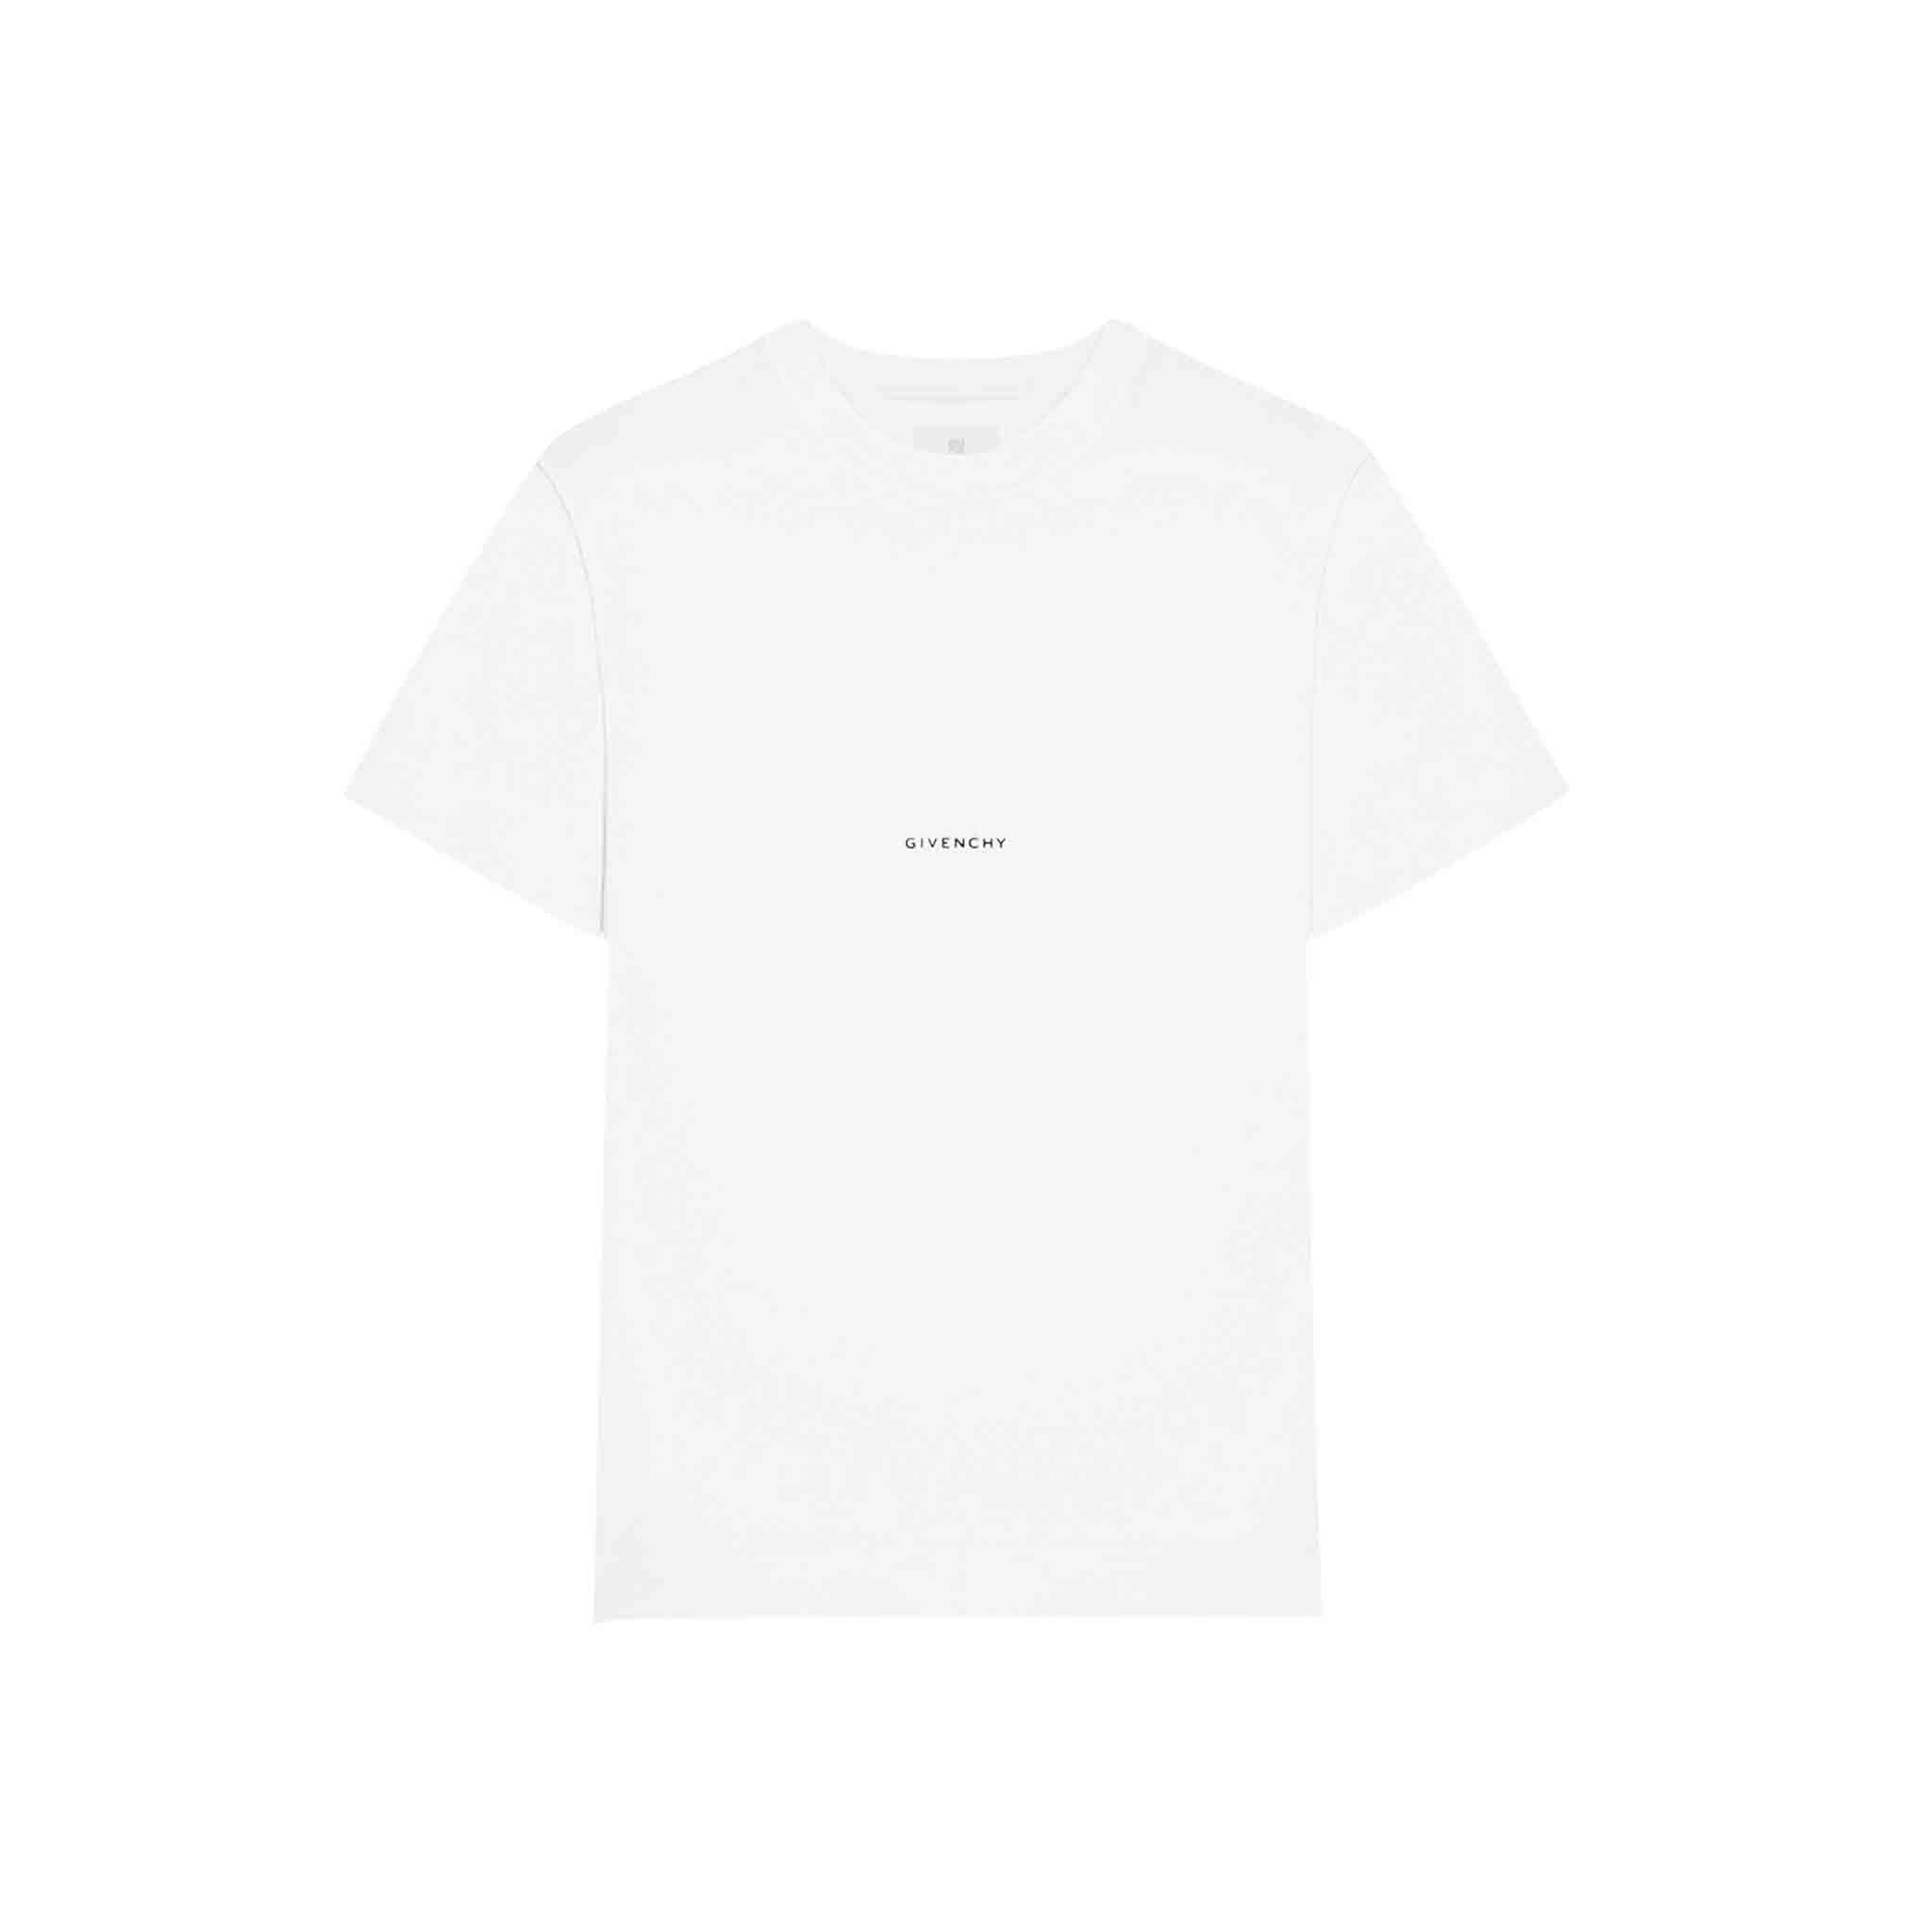 Givenchy Small Logo Slim Fit T-Shirt in White